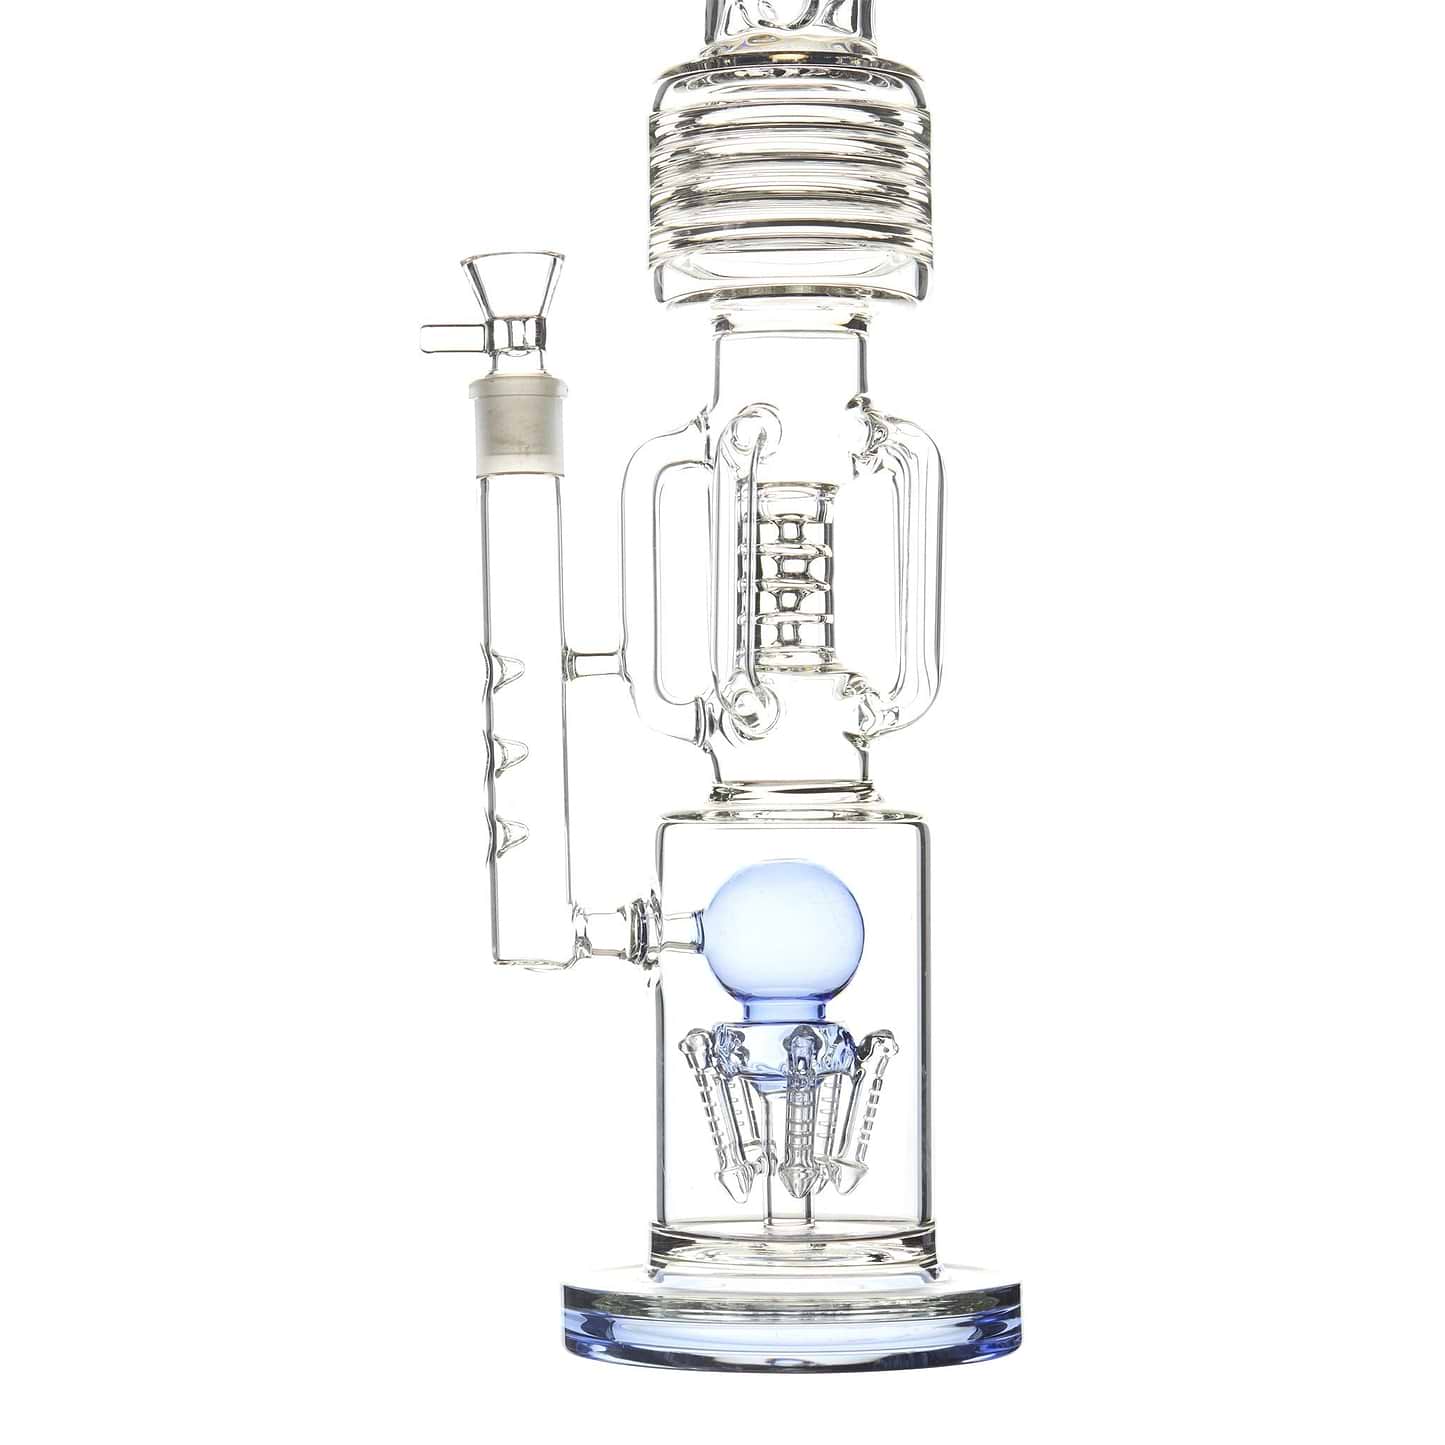 Shot from the chamber neck to base of 22-inch clear glass bong smoking device with blue accents